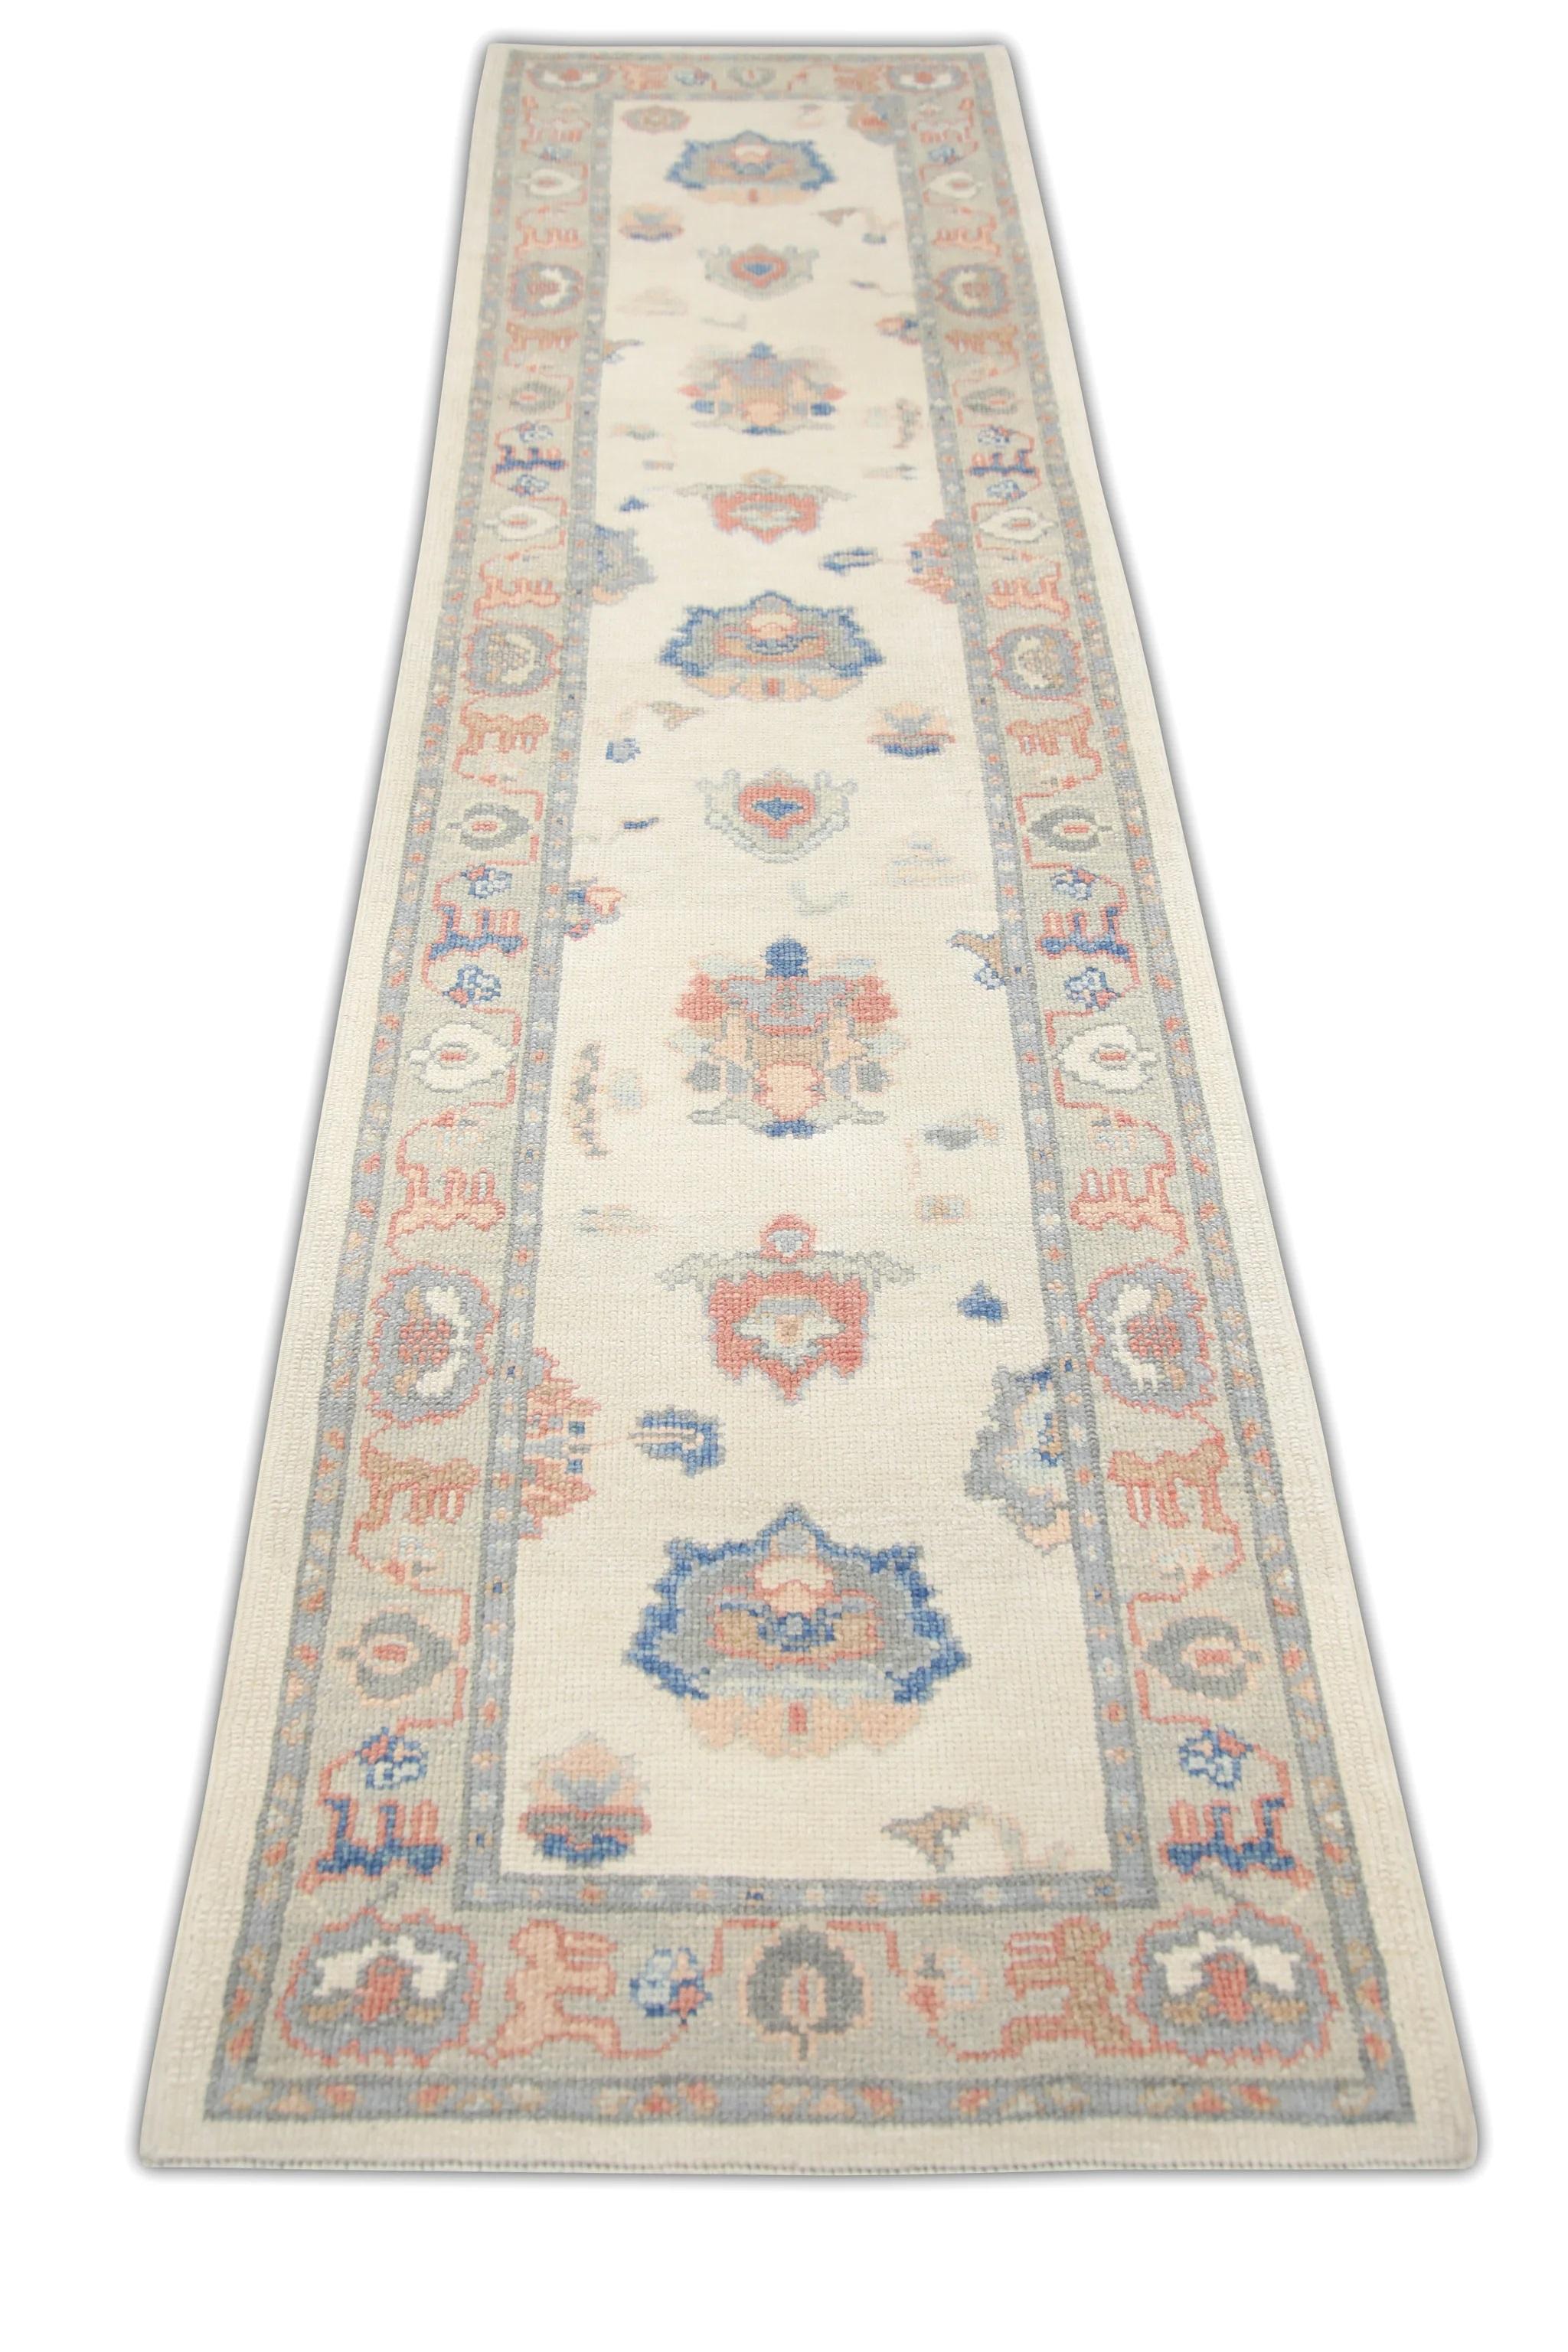 Contemporary Cream Handwoven Wool Turkish Oushak Rug in Blue & Pink Floral Design 2'9